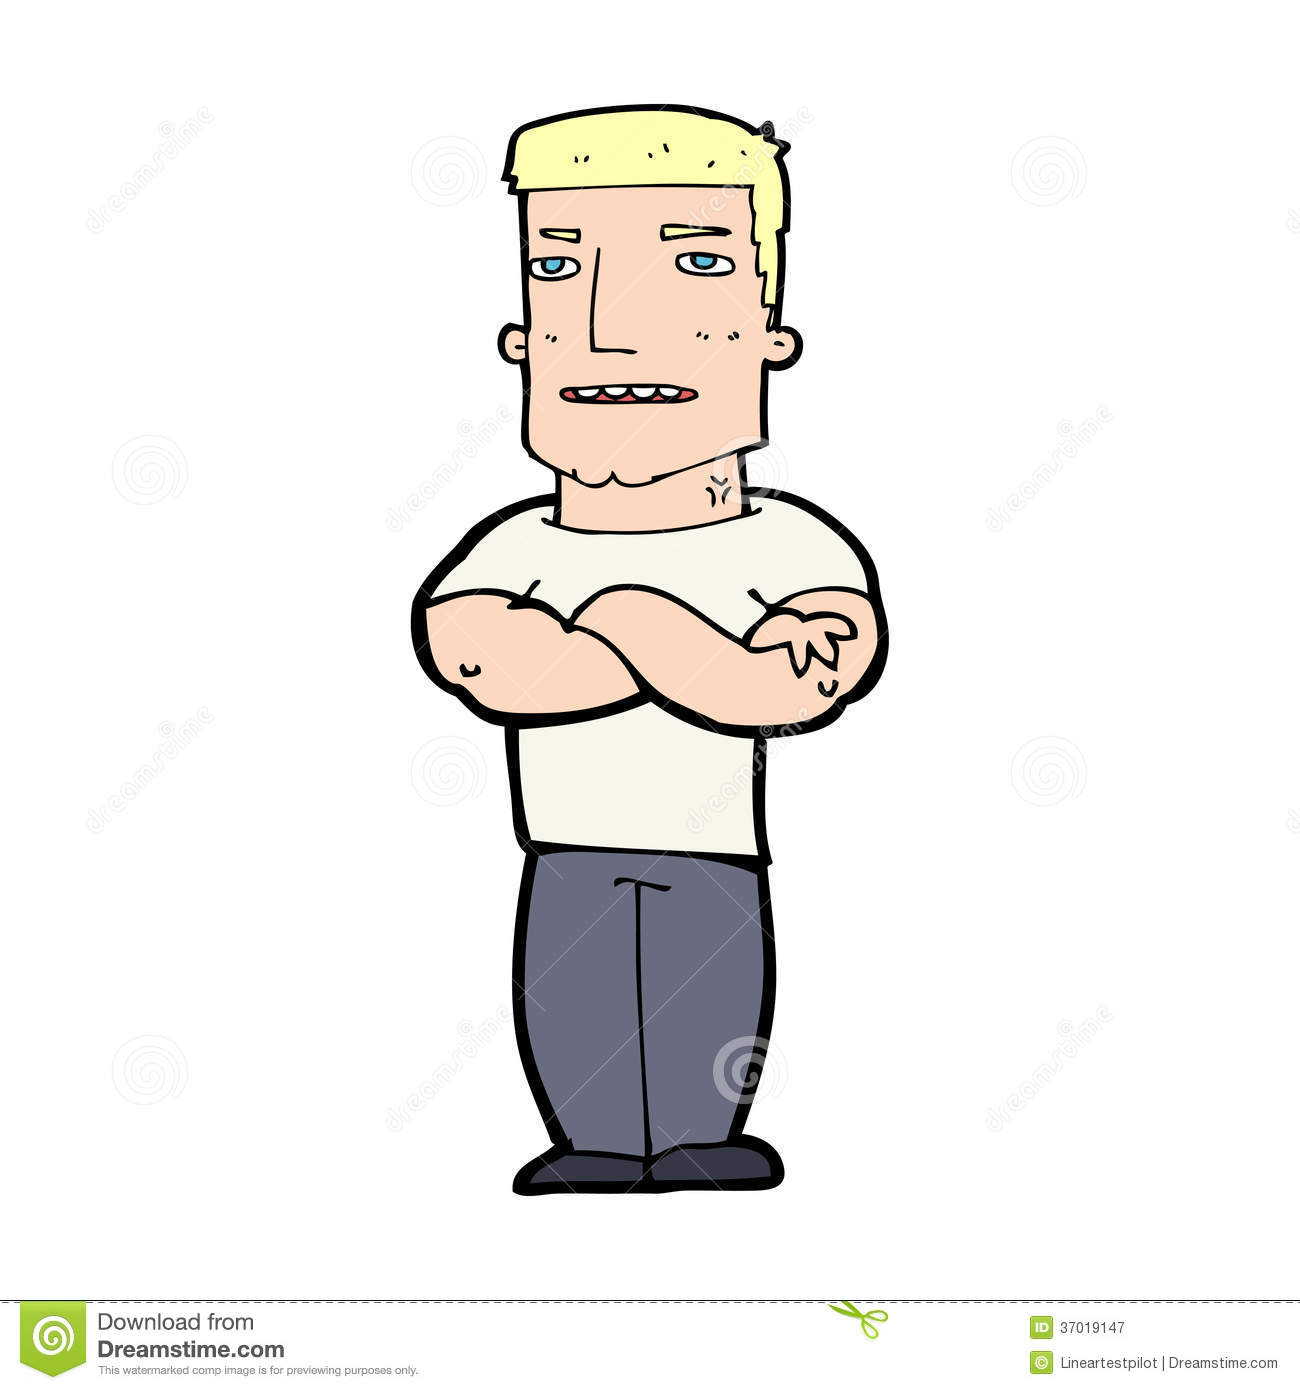 Cartoon Tough Guy With Folded Arms Royalty Free Stock Photography